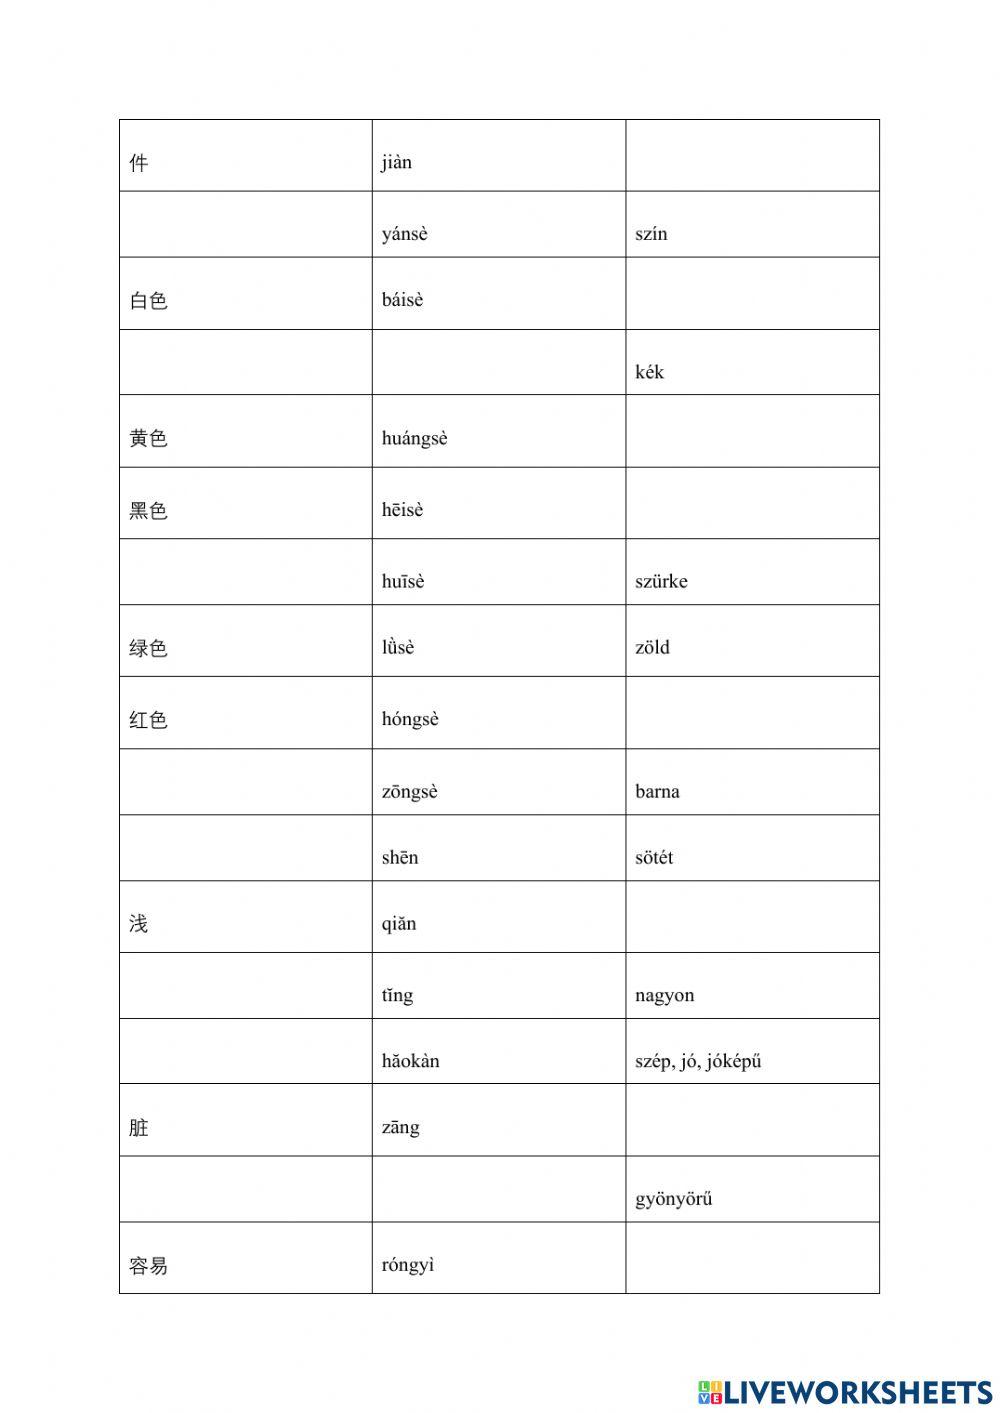 Boya Chinese Lesson 14 words